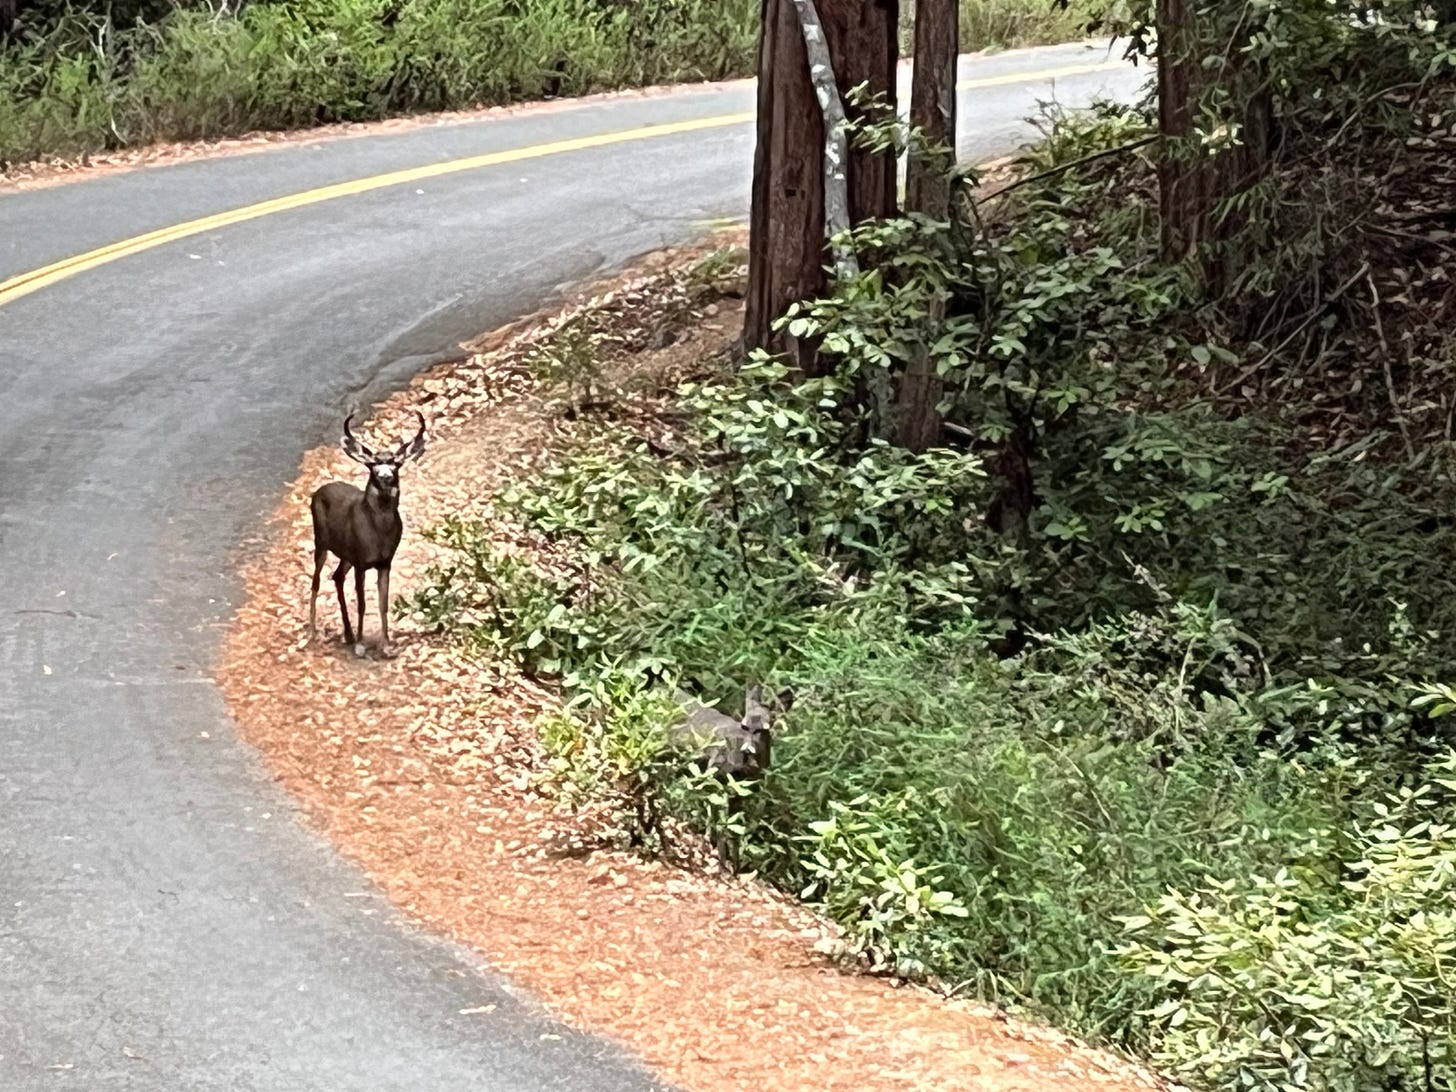 Buck and doe near a paved road in a forest